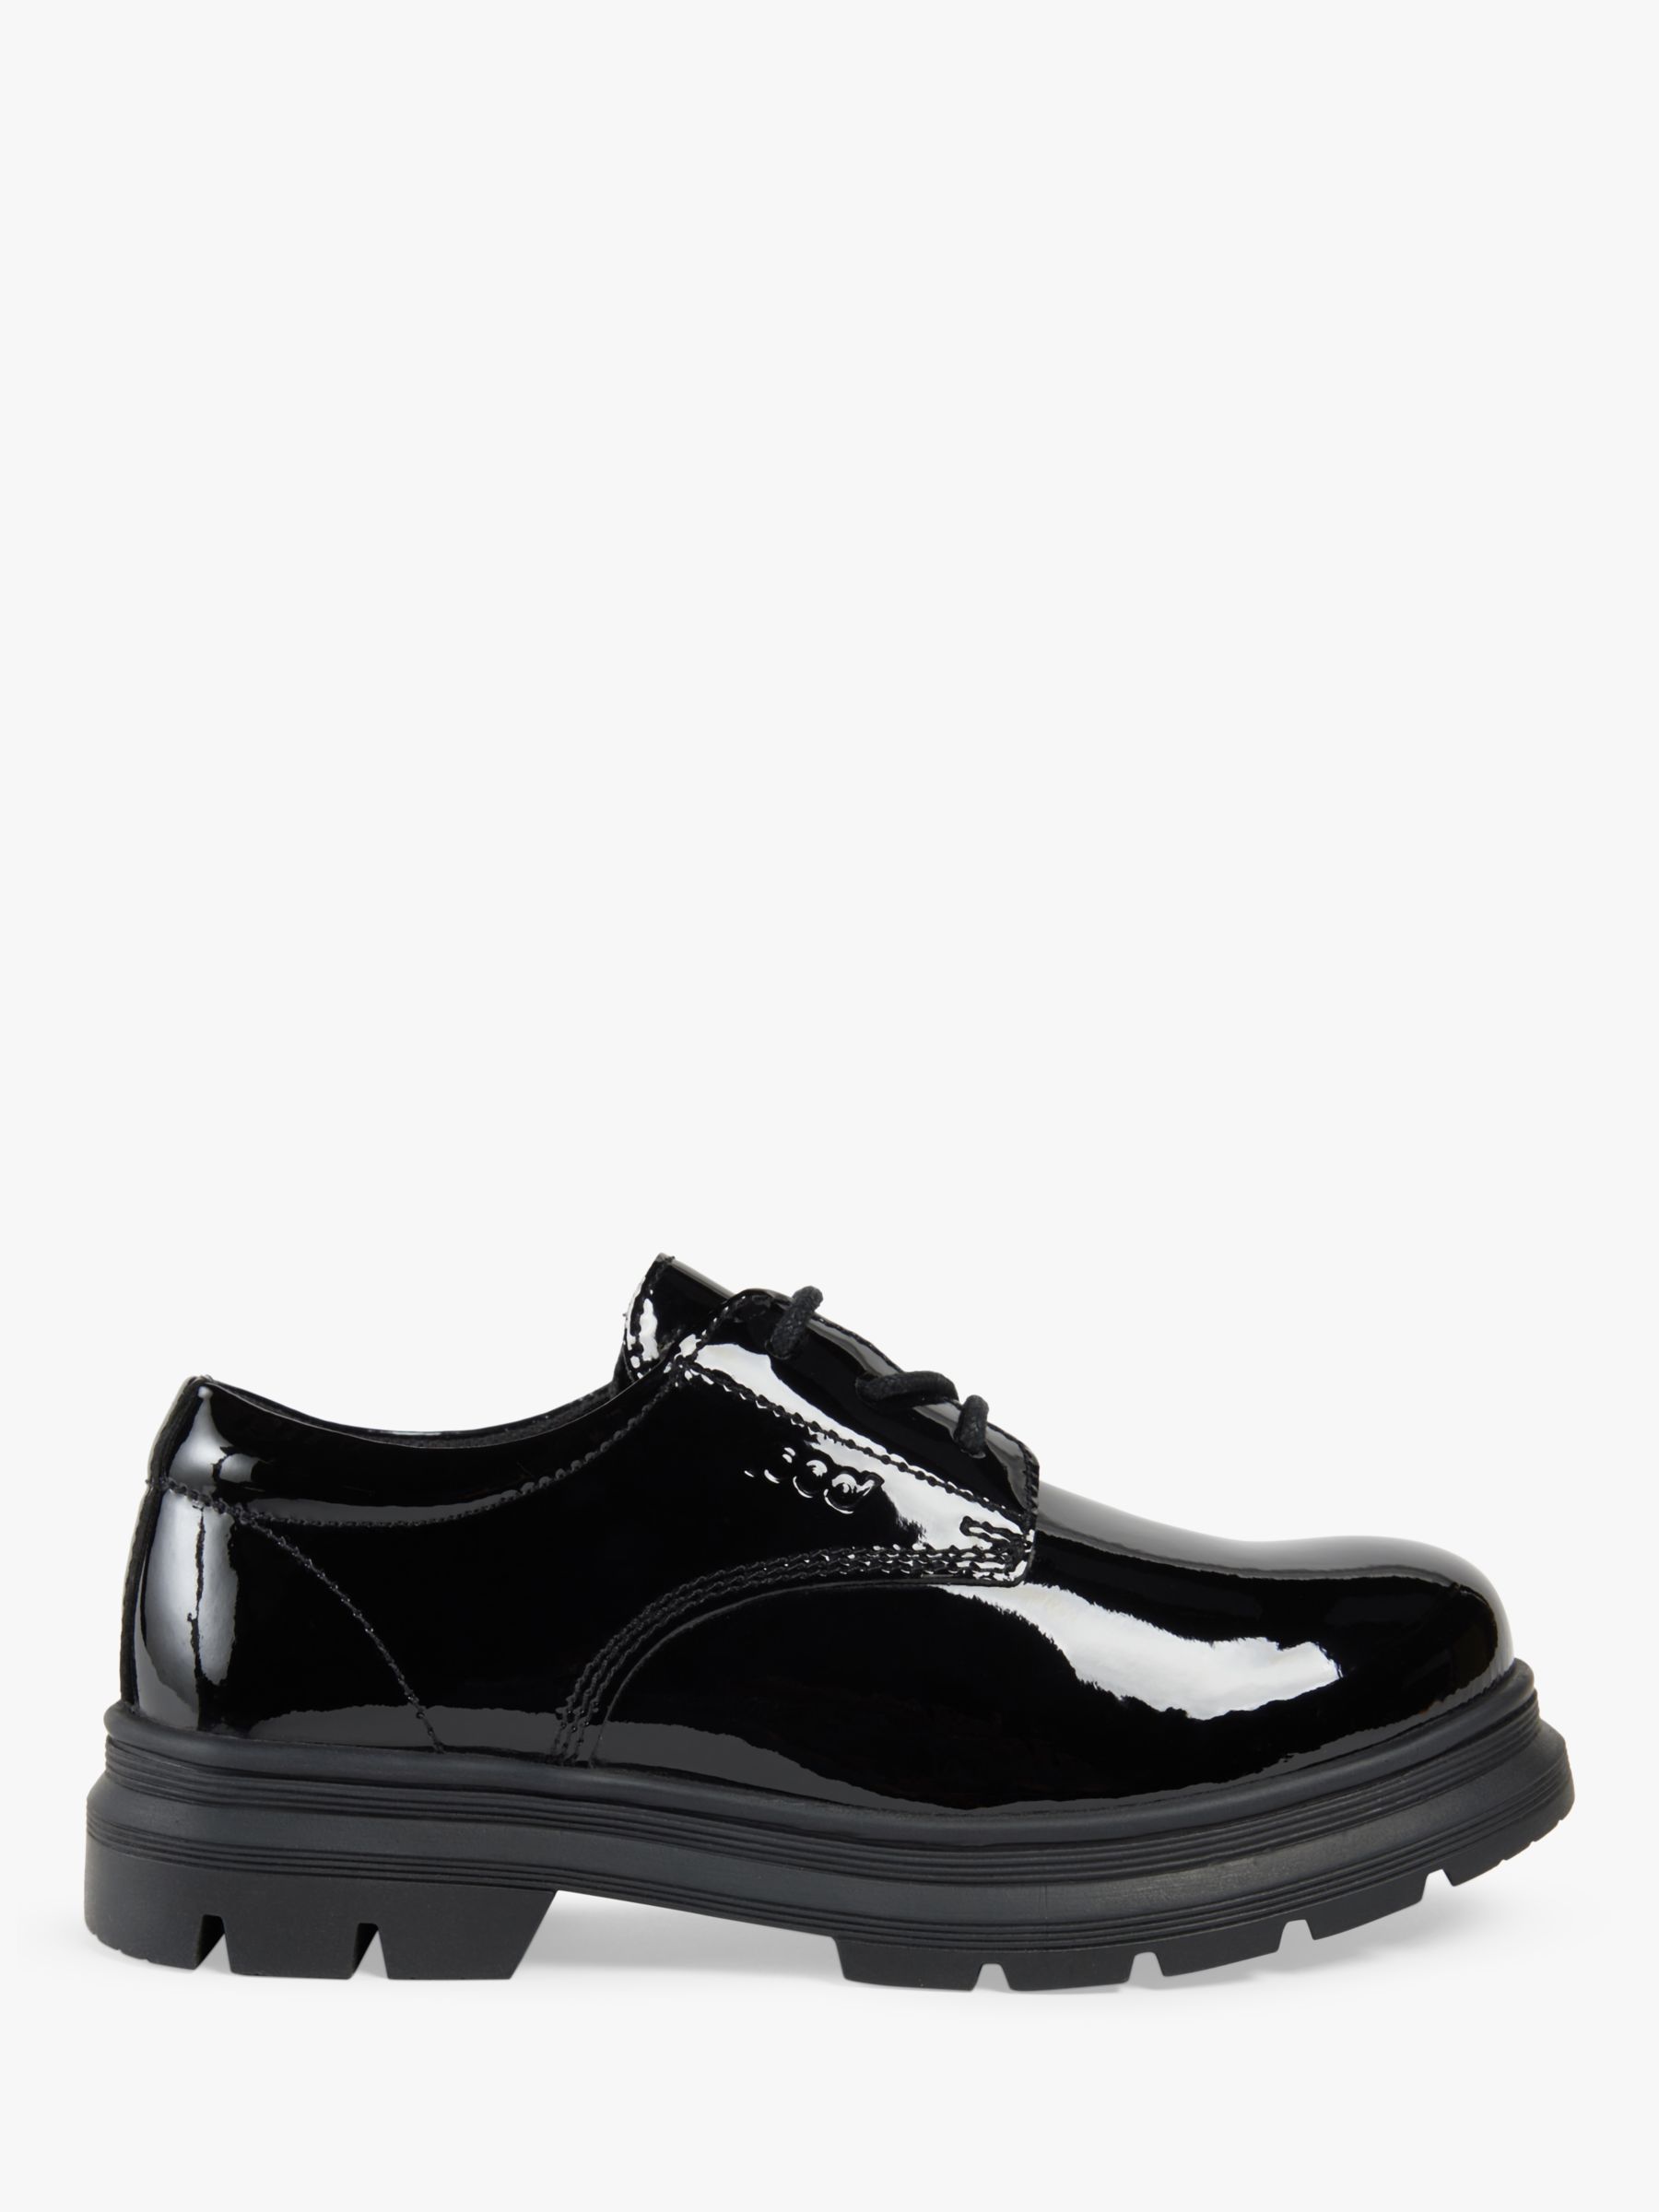 Pod Kids' Irene Patent Leather Lace Up Shoes, Black at John Lewis ...